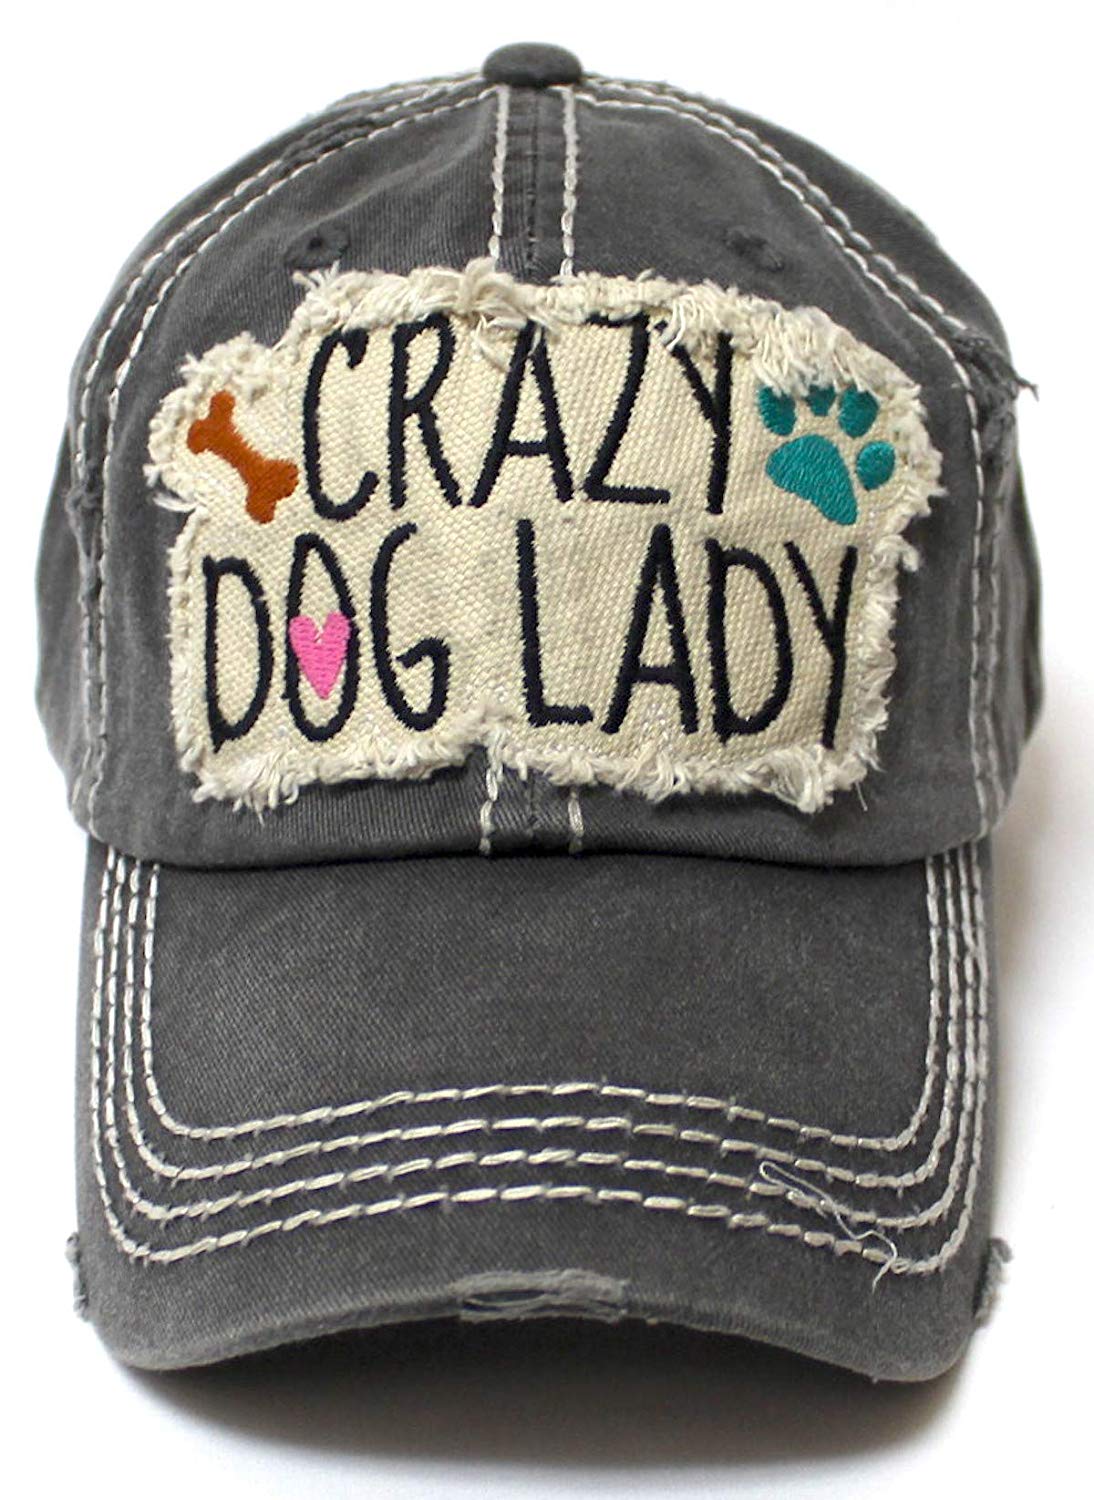 Women's Baseball Cap Crazy Dog Lady Patch Embroidery, Black - Caps 'N Vintage 